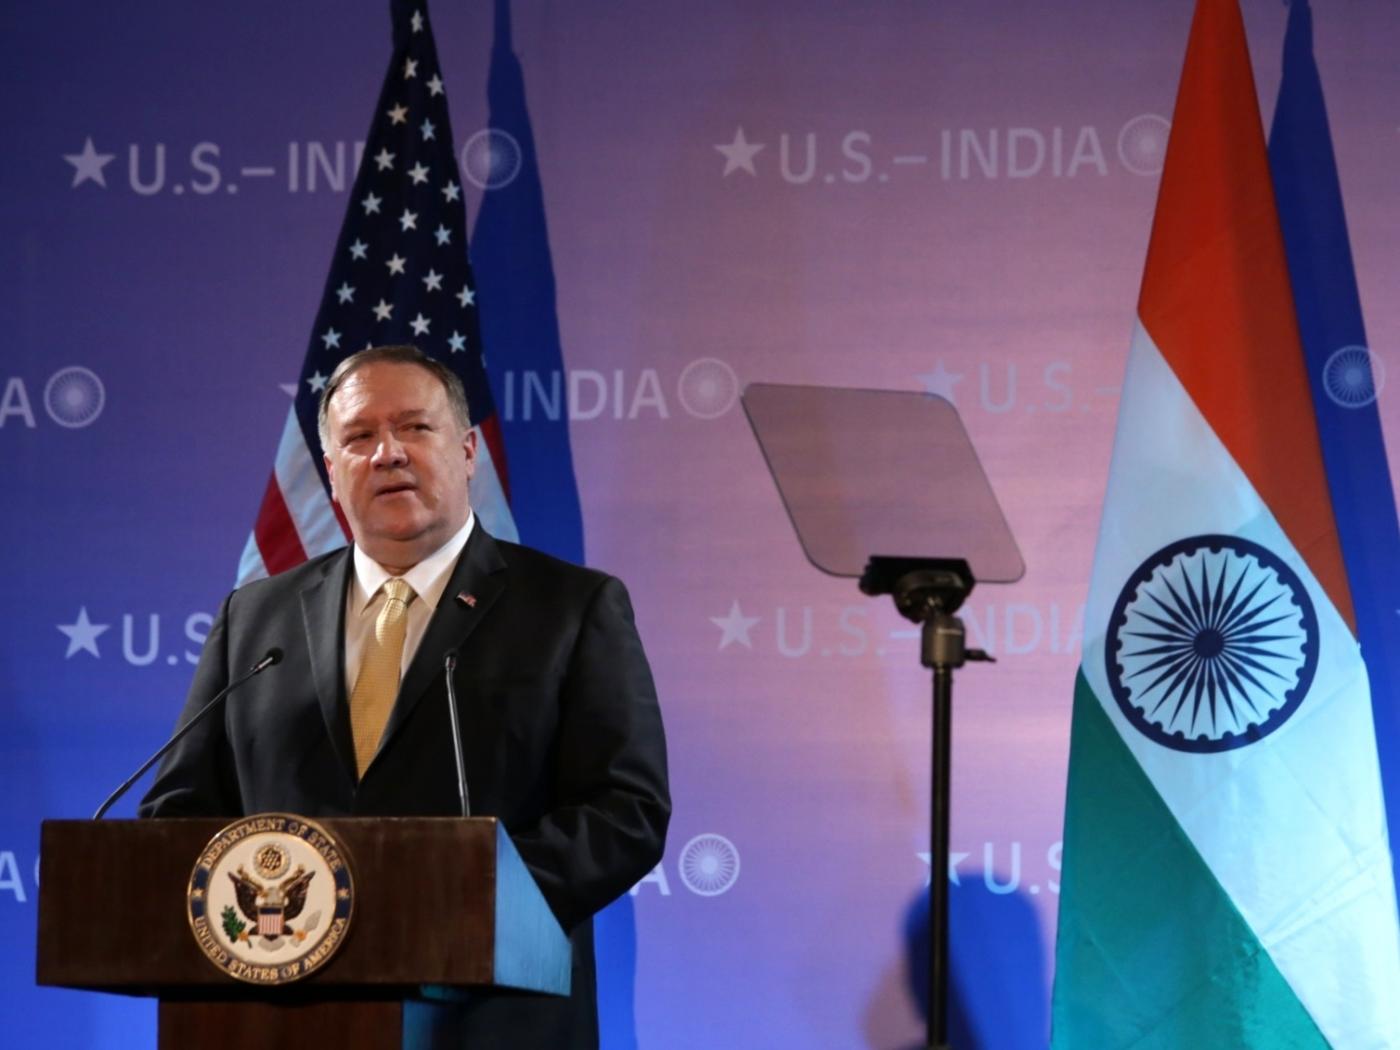 New Delhi: US Secretary of State Mike Pompeo addresses at the Embassy of the United States of America in New Delhi on June 26, 2019. (Photo: Amlan Paliwal/IANS) by .